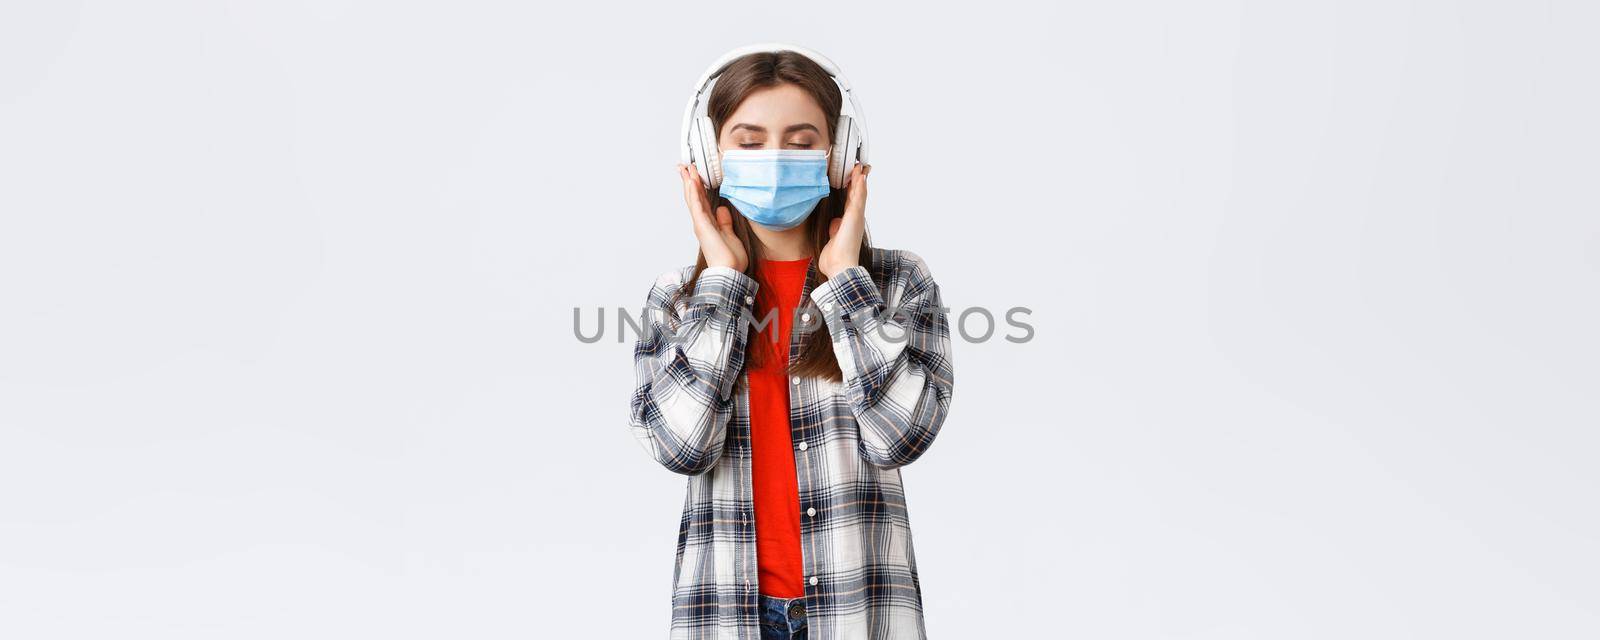 Social distancing, leisure and lifestyle on covid-19, coronavirus concept. Carefree relaxed woman in medical mask carried away with music in headphones, close eyes from satisfaction nice sound.